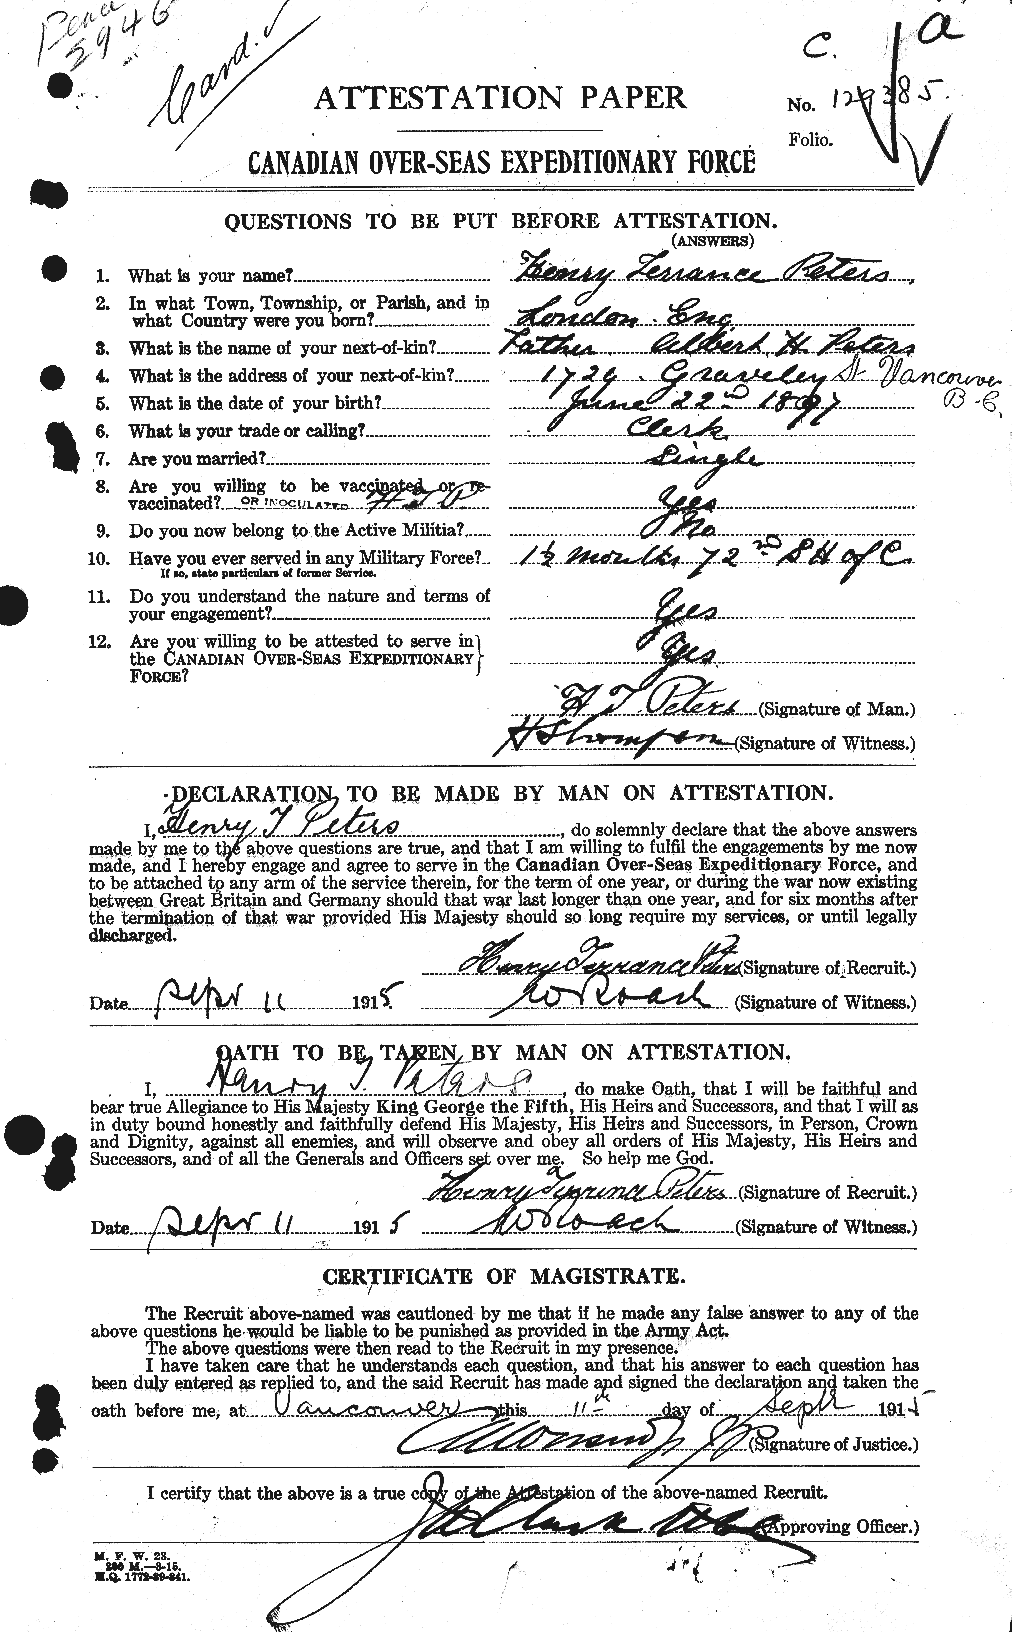 Personnel Records of the First World War - CEF 575493a